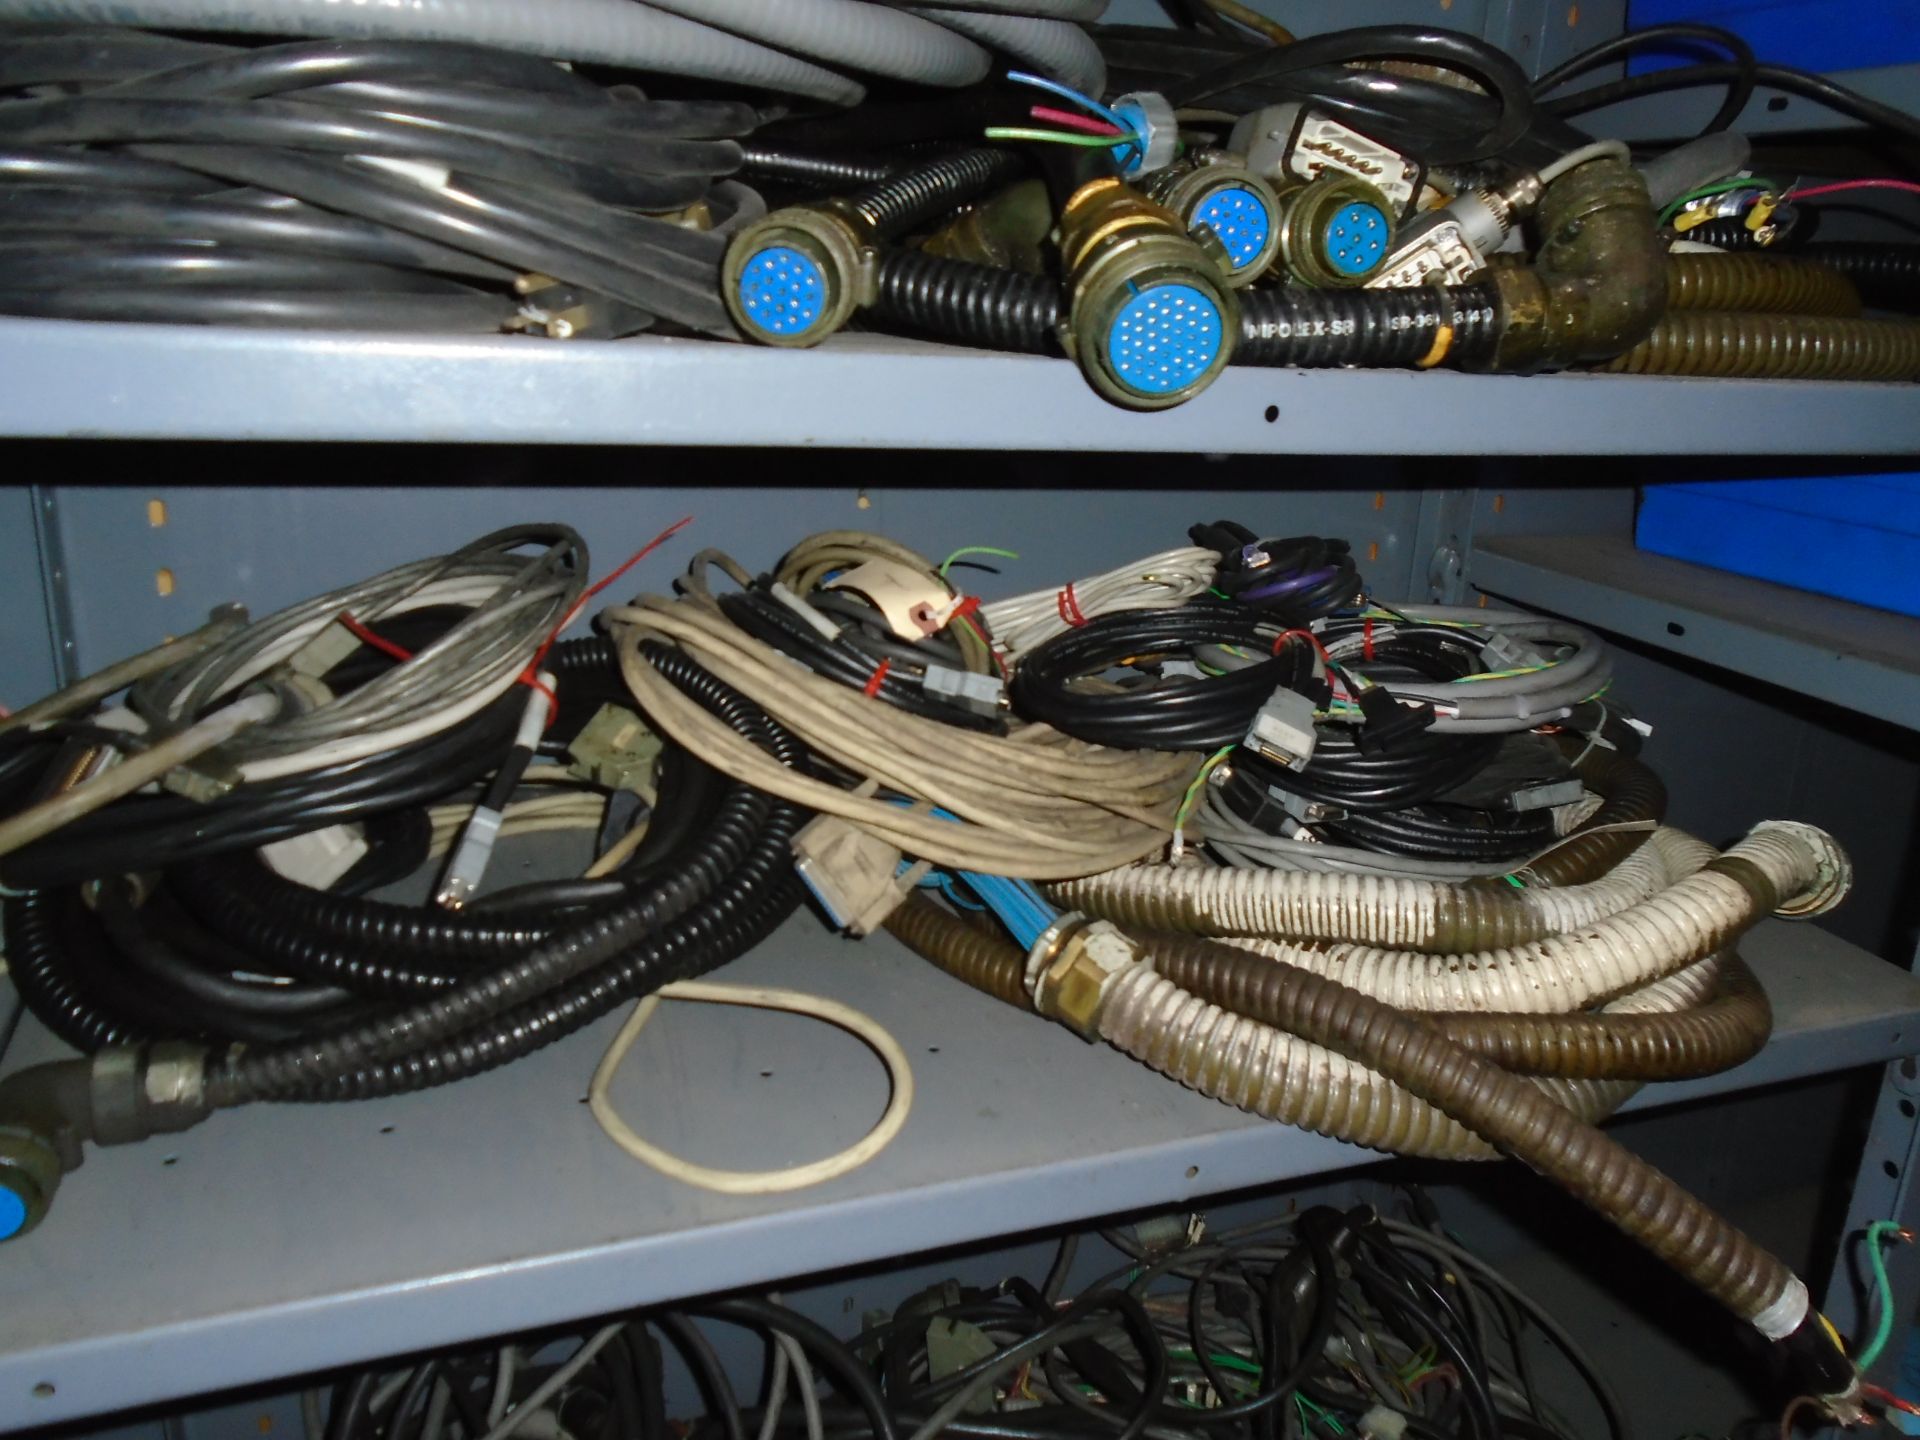 6 Shelves Of CNC Servo Power Cables For Lathes & Mills - Image 3 of 4